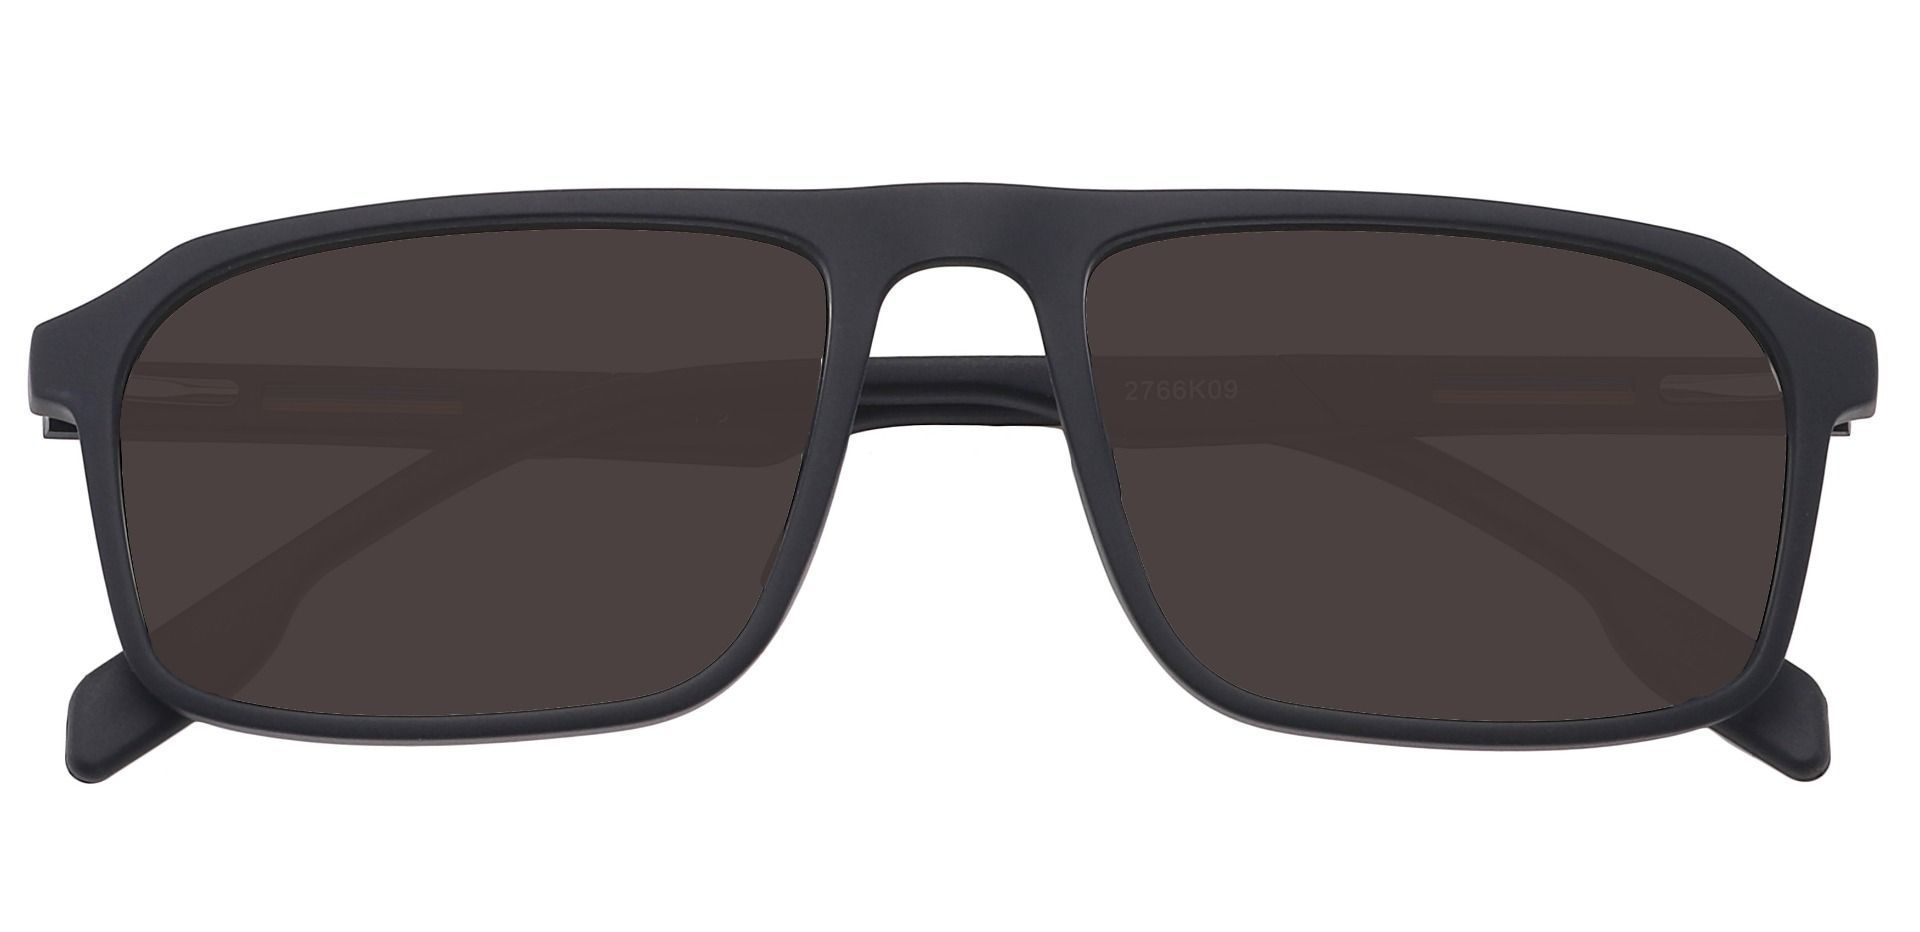 Hector Rectangle Reading Sunglasses - Black Frame With Gray Lenses